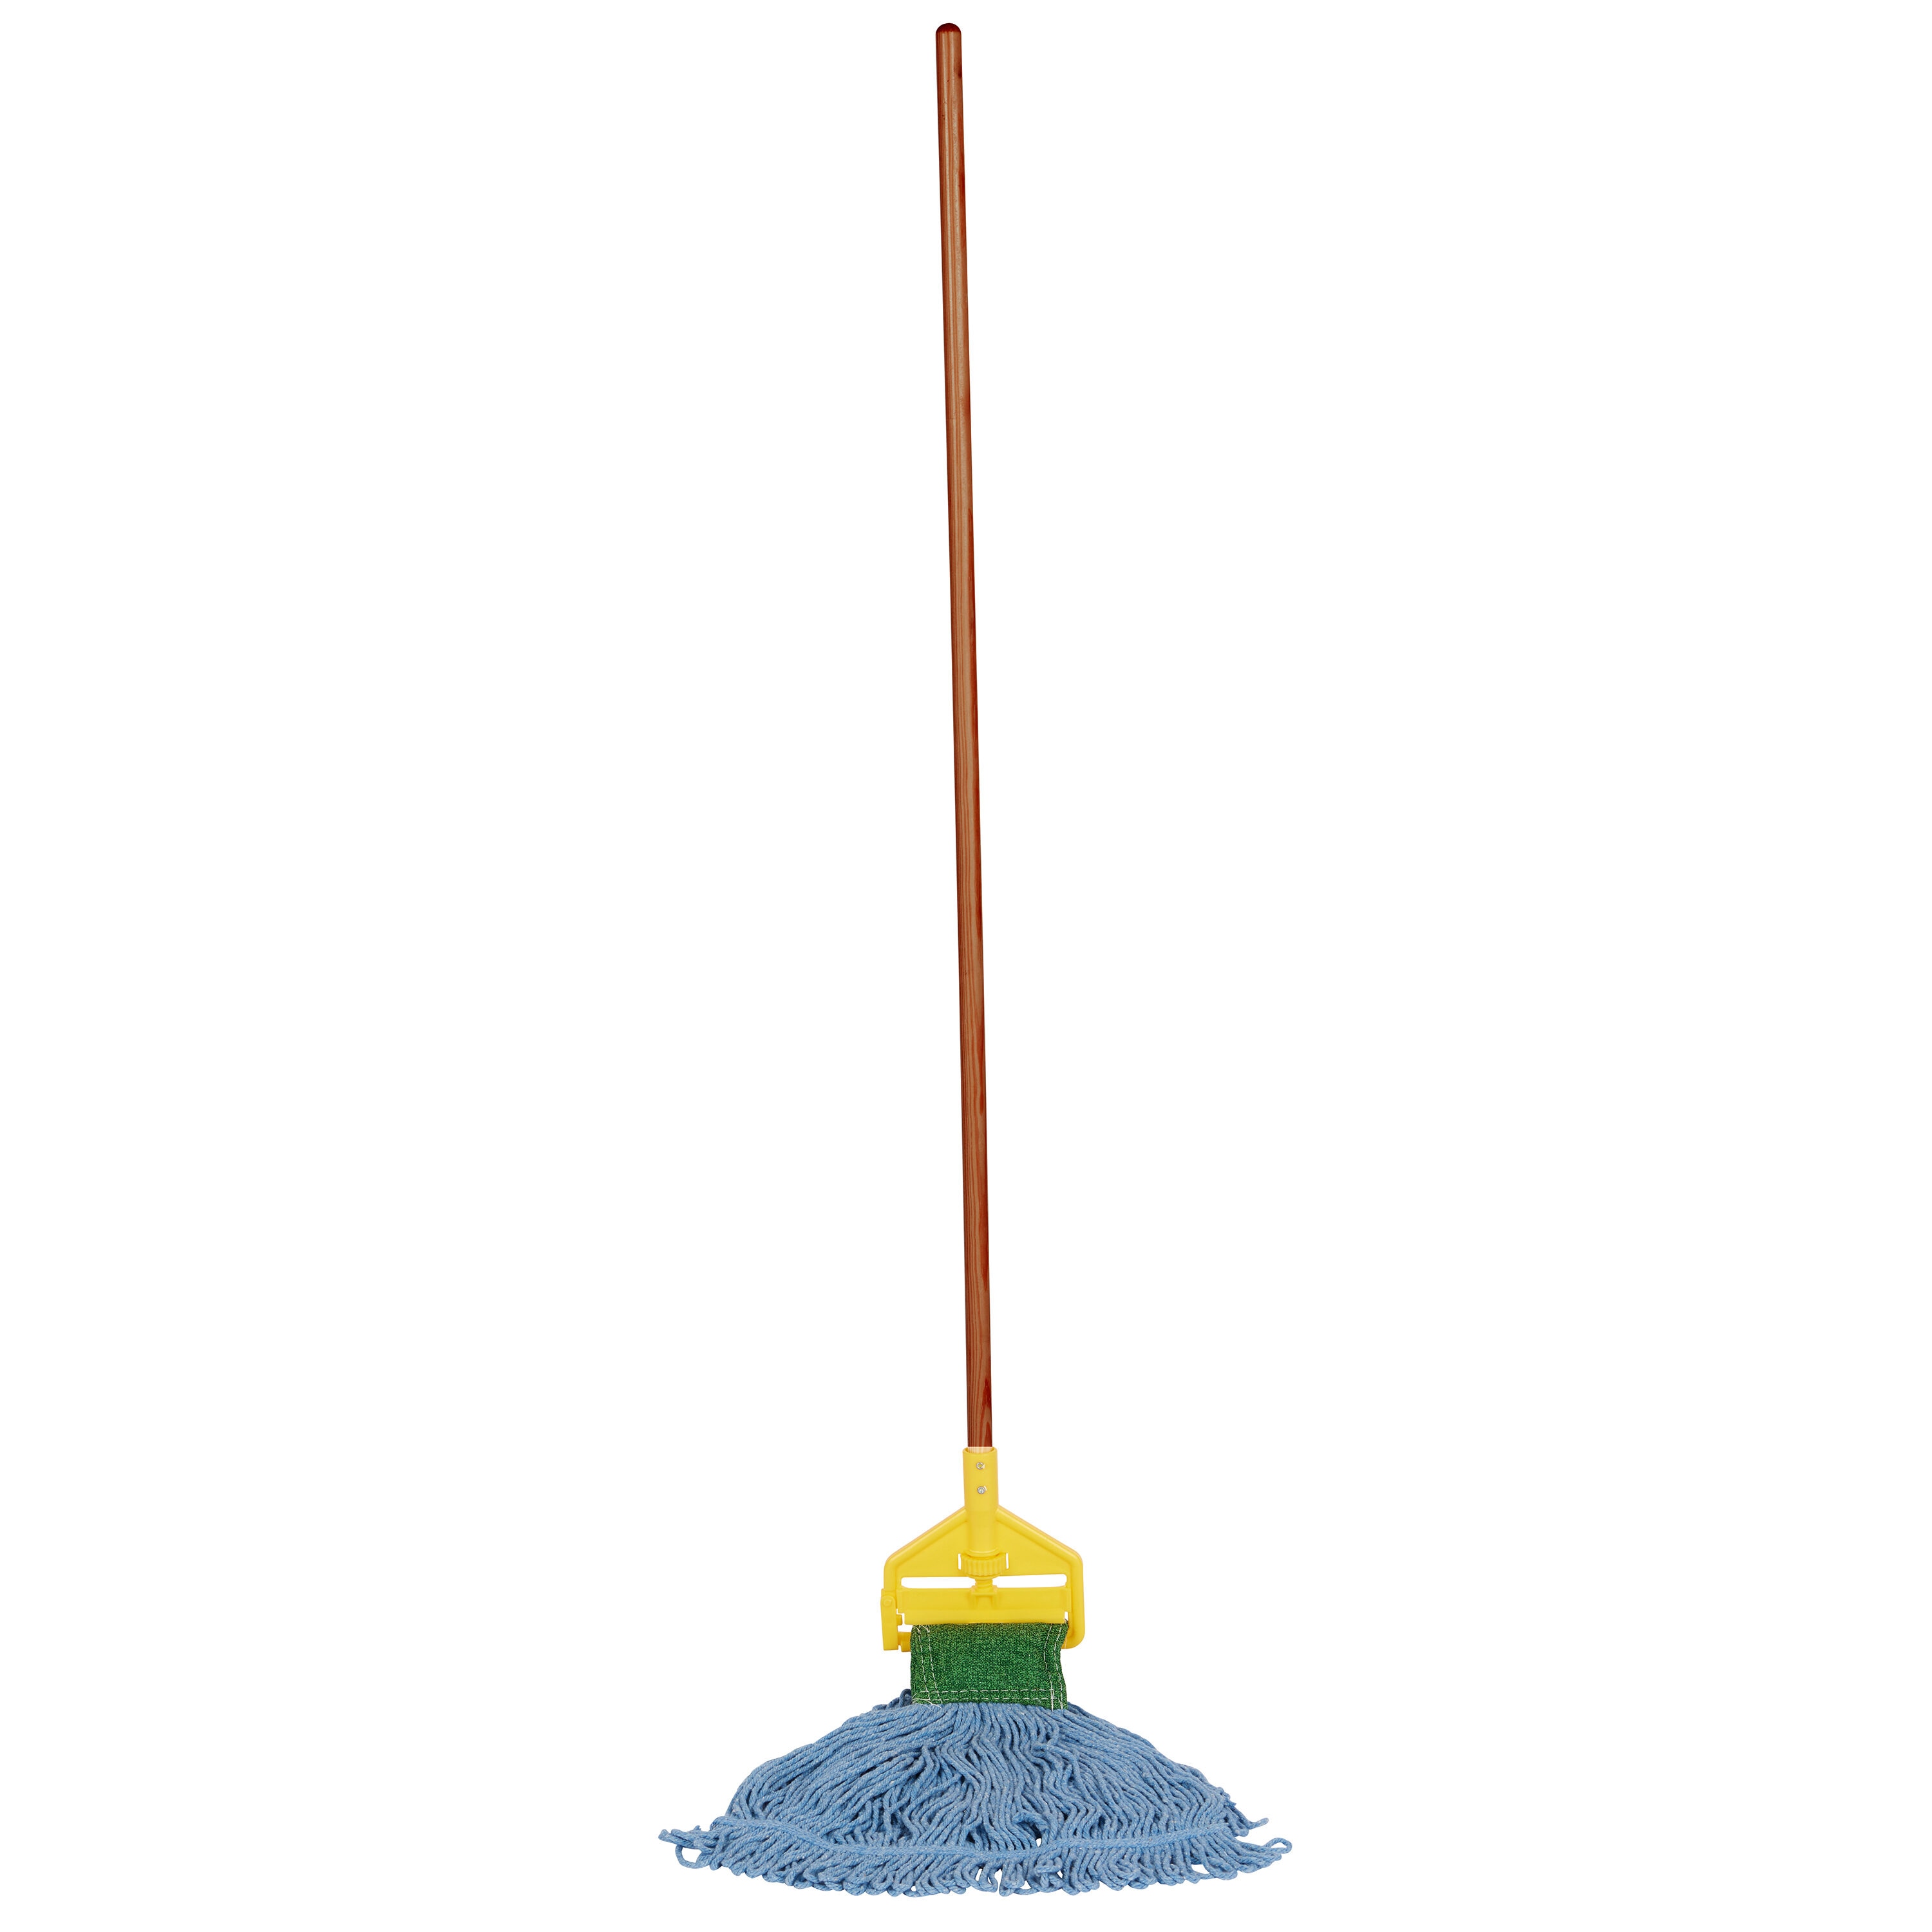 Commercial Wet Mops: How to Use a Mop & The Best Way to Clean a Mop